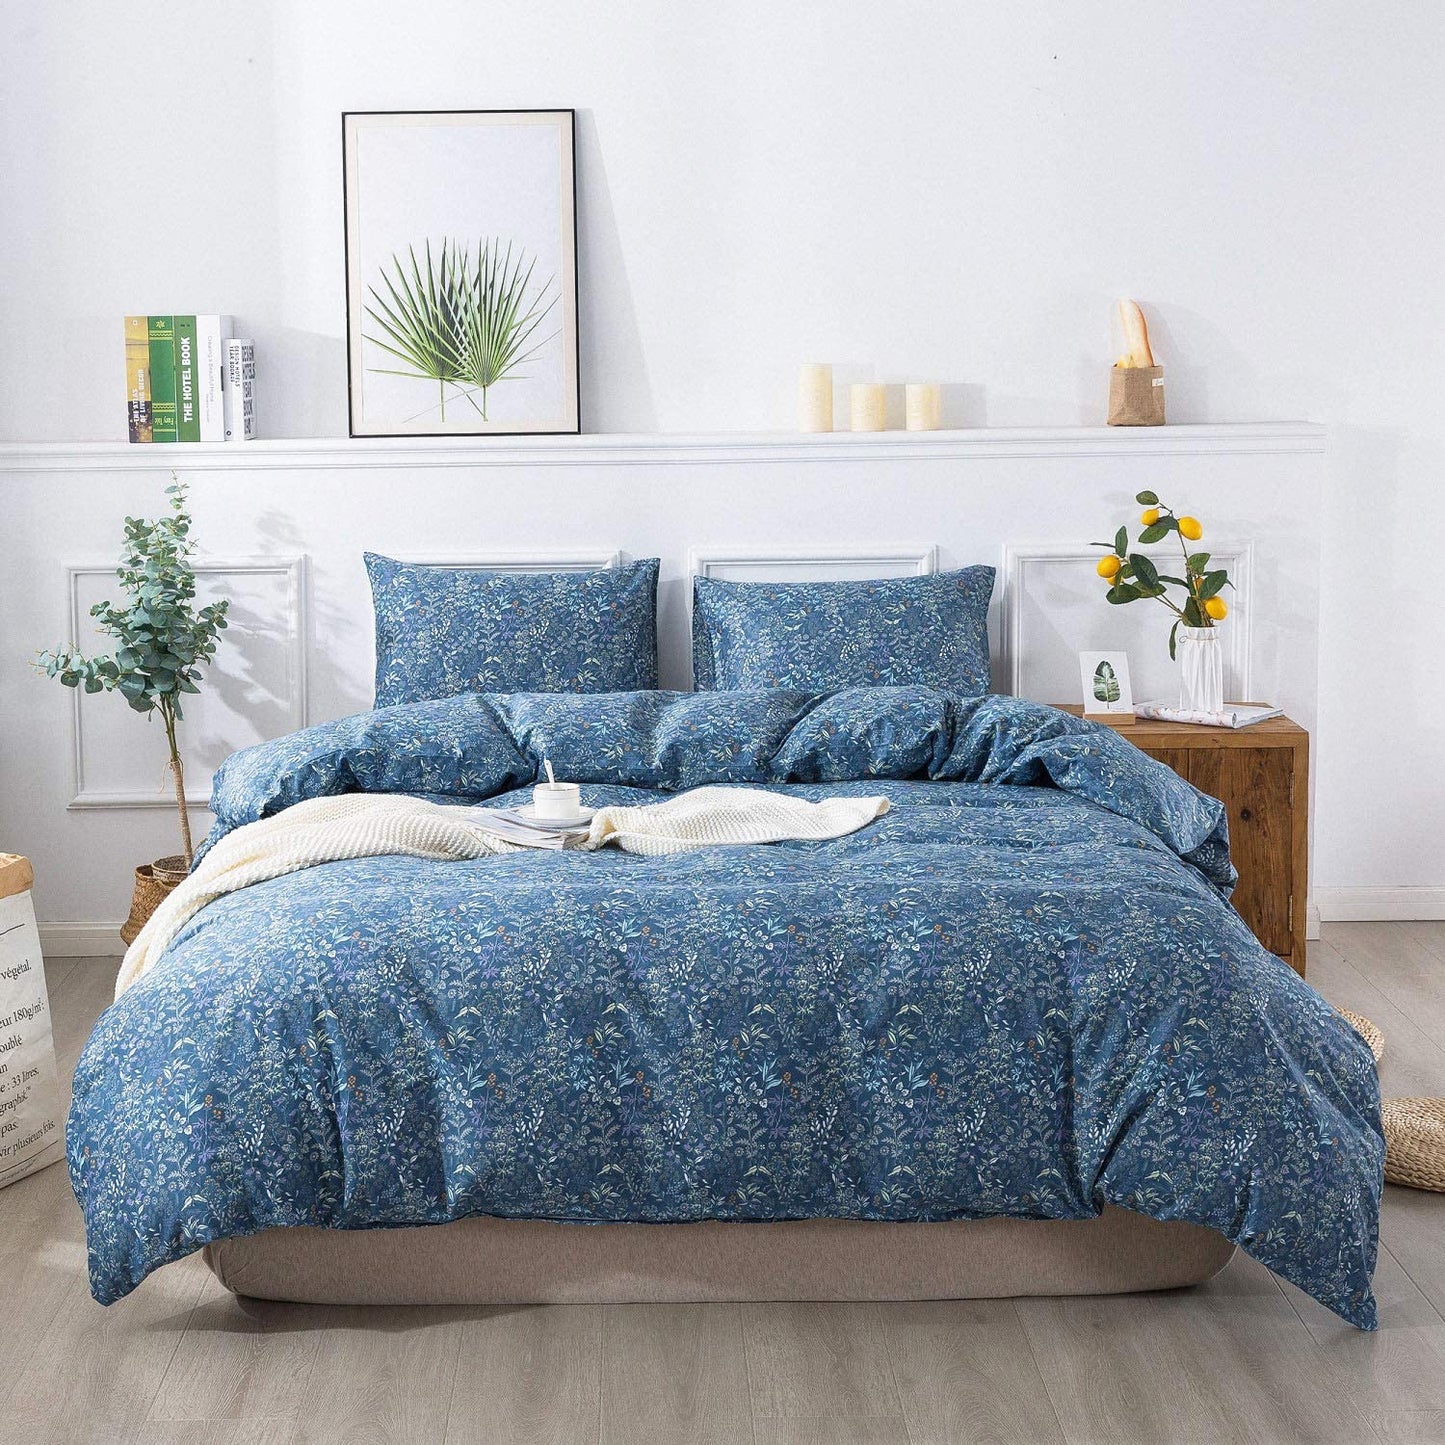 Cotton Duvet Cover,Floral Comforter Cover Set, Soft&Breathable, Natural Flower Collections